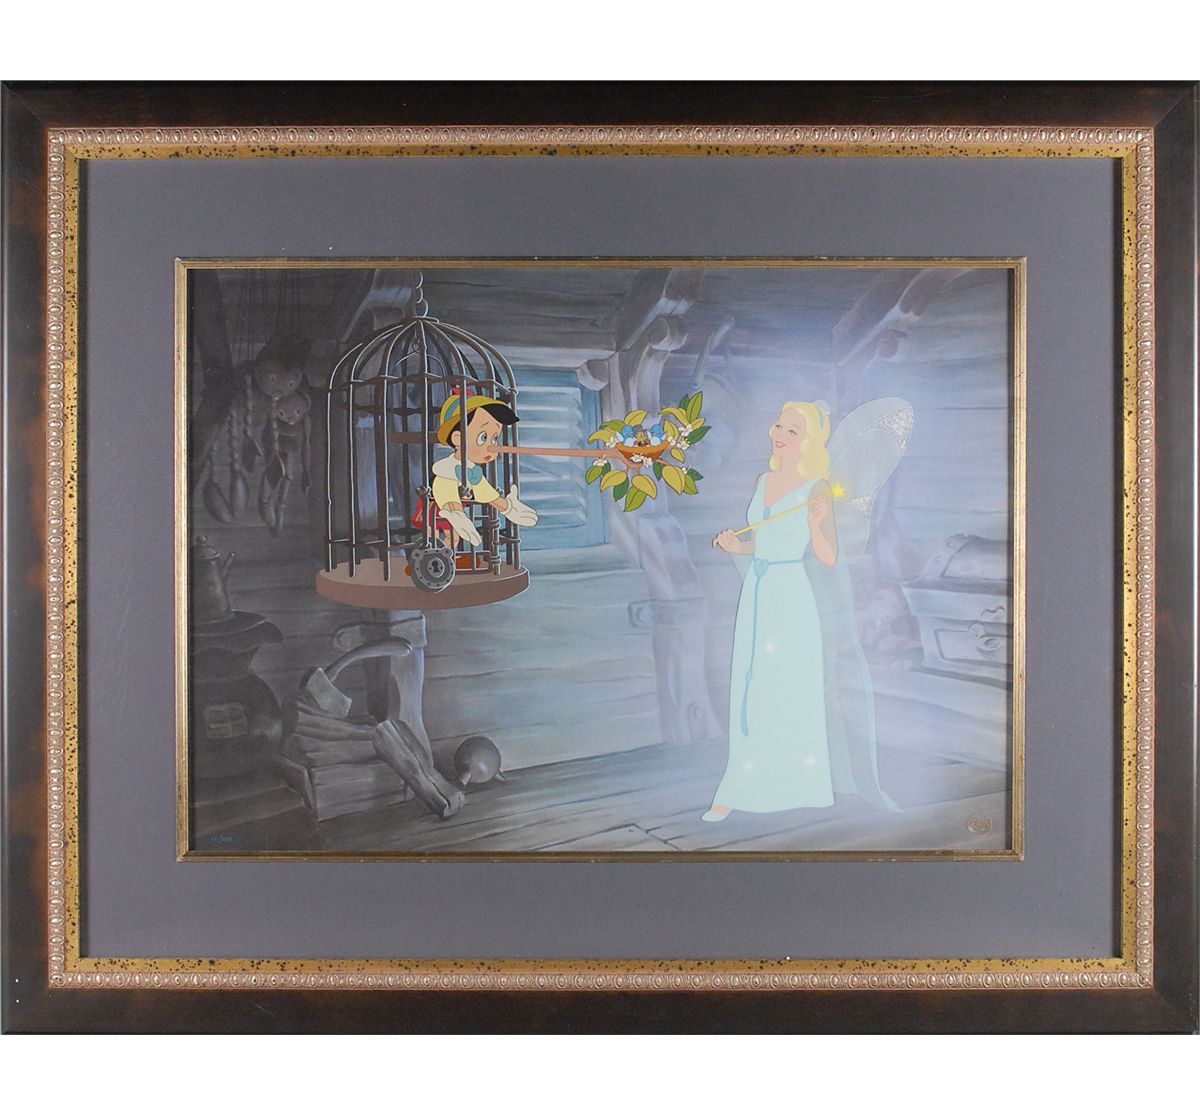 Fate Steps In Limited Edition Hand Panted Cel Based on Pinocchio